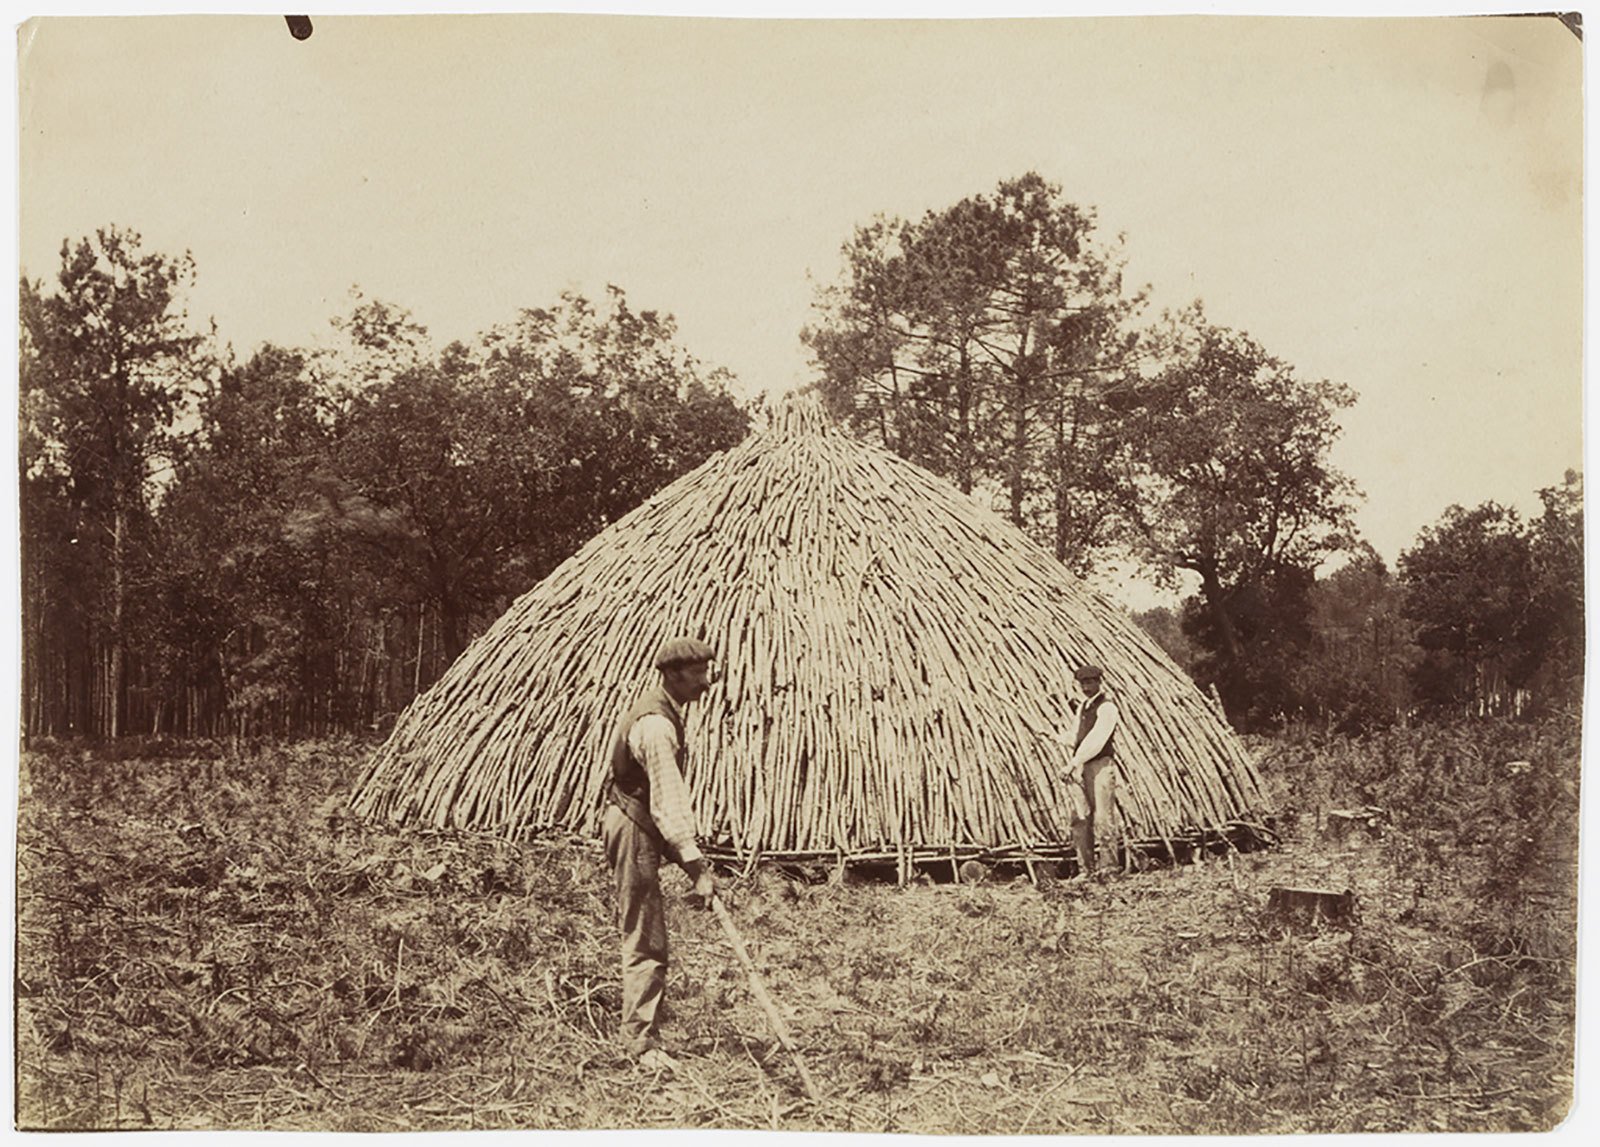 F&eacute;lix Arnaudin, Charcoal making at Baxourdes with Cazade and Vidal, 25 steps East, 14 June 1885. Print from gelatin silver bromide negative. Collection mus&eacute;e d&rsquo;Aquitaine